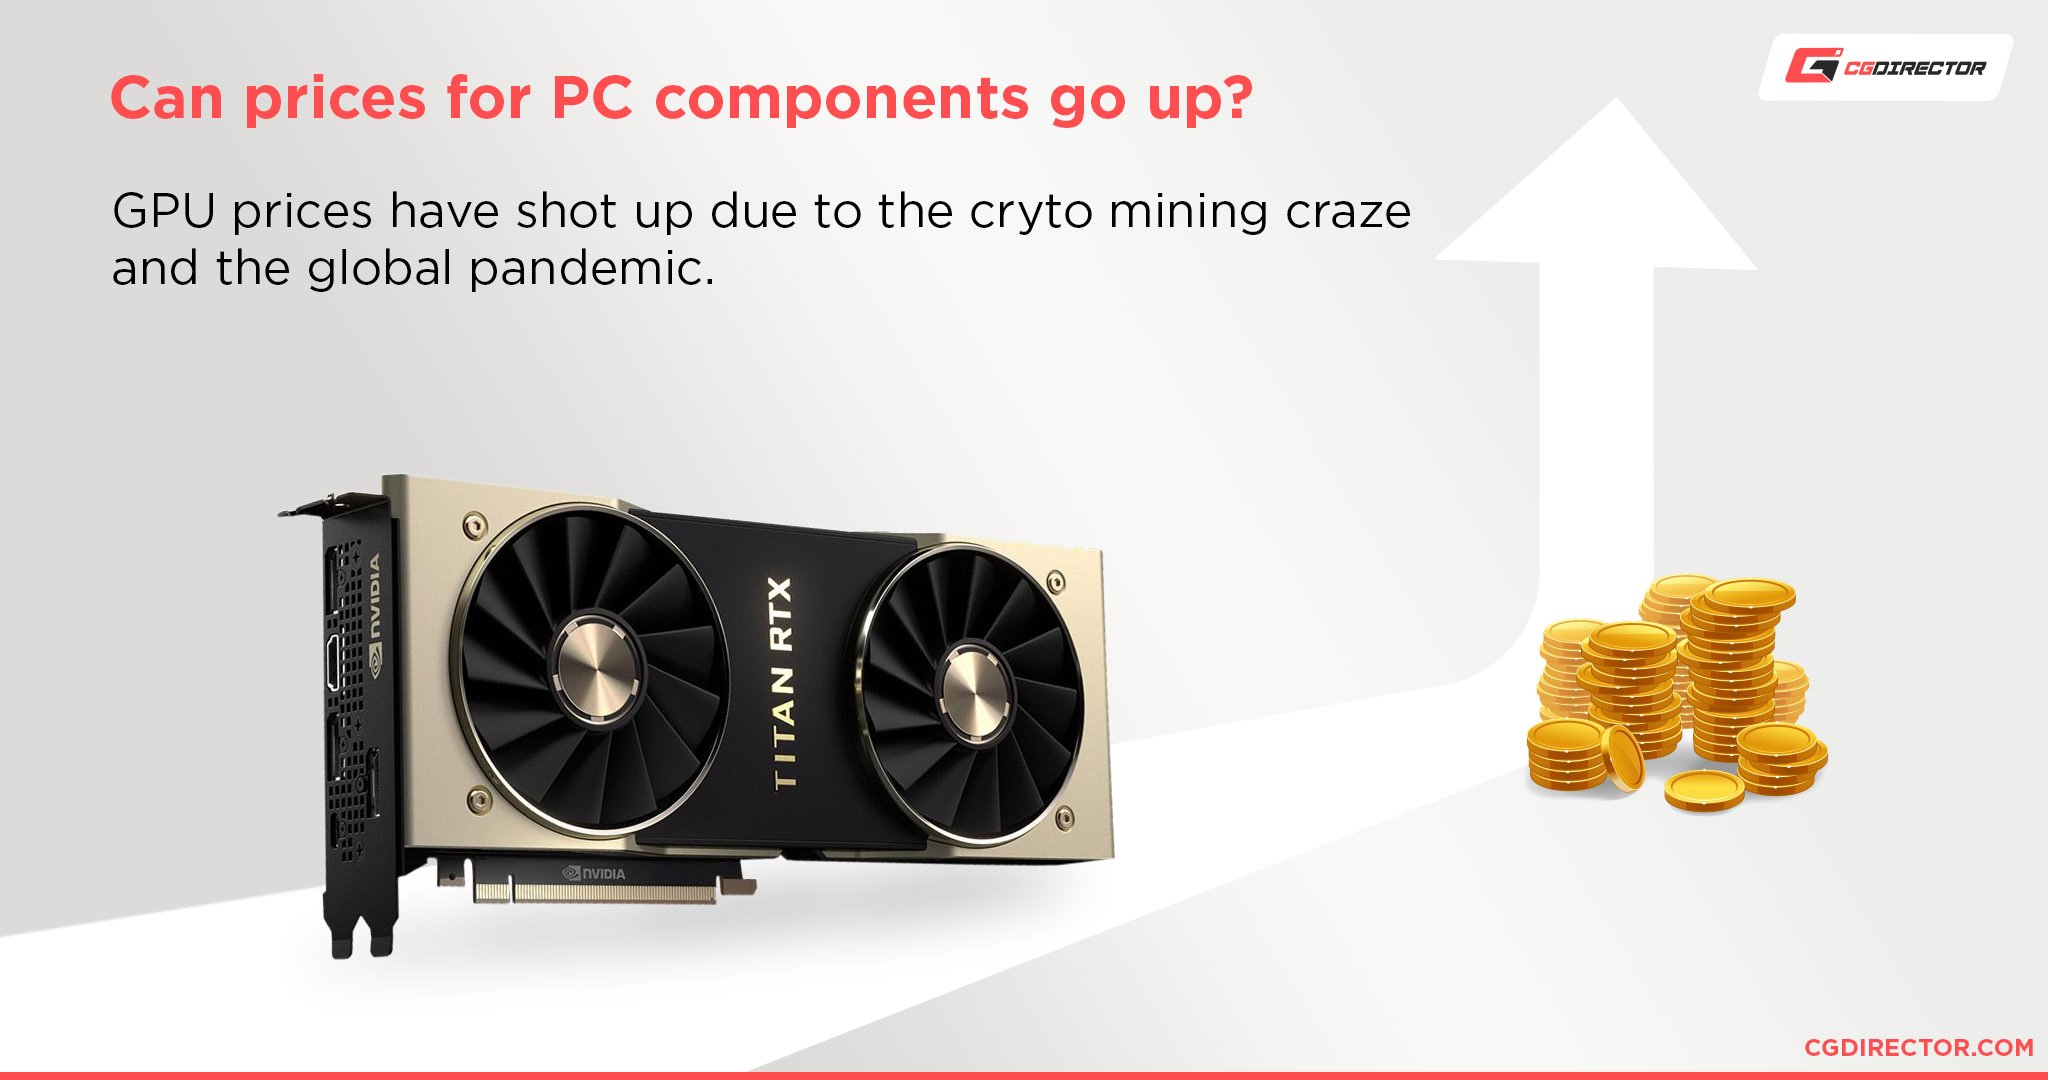 Can prices for PC components go up?